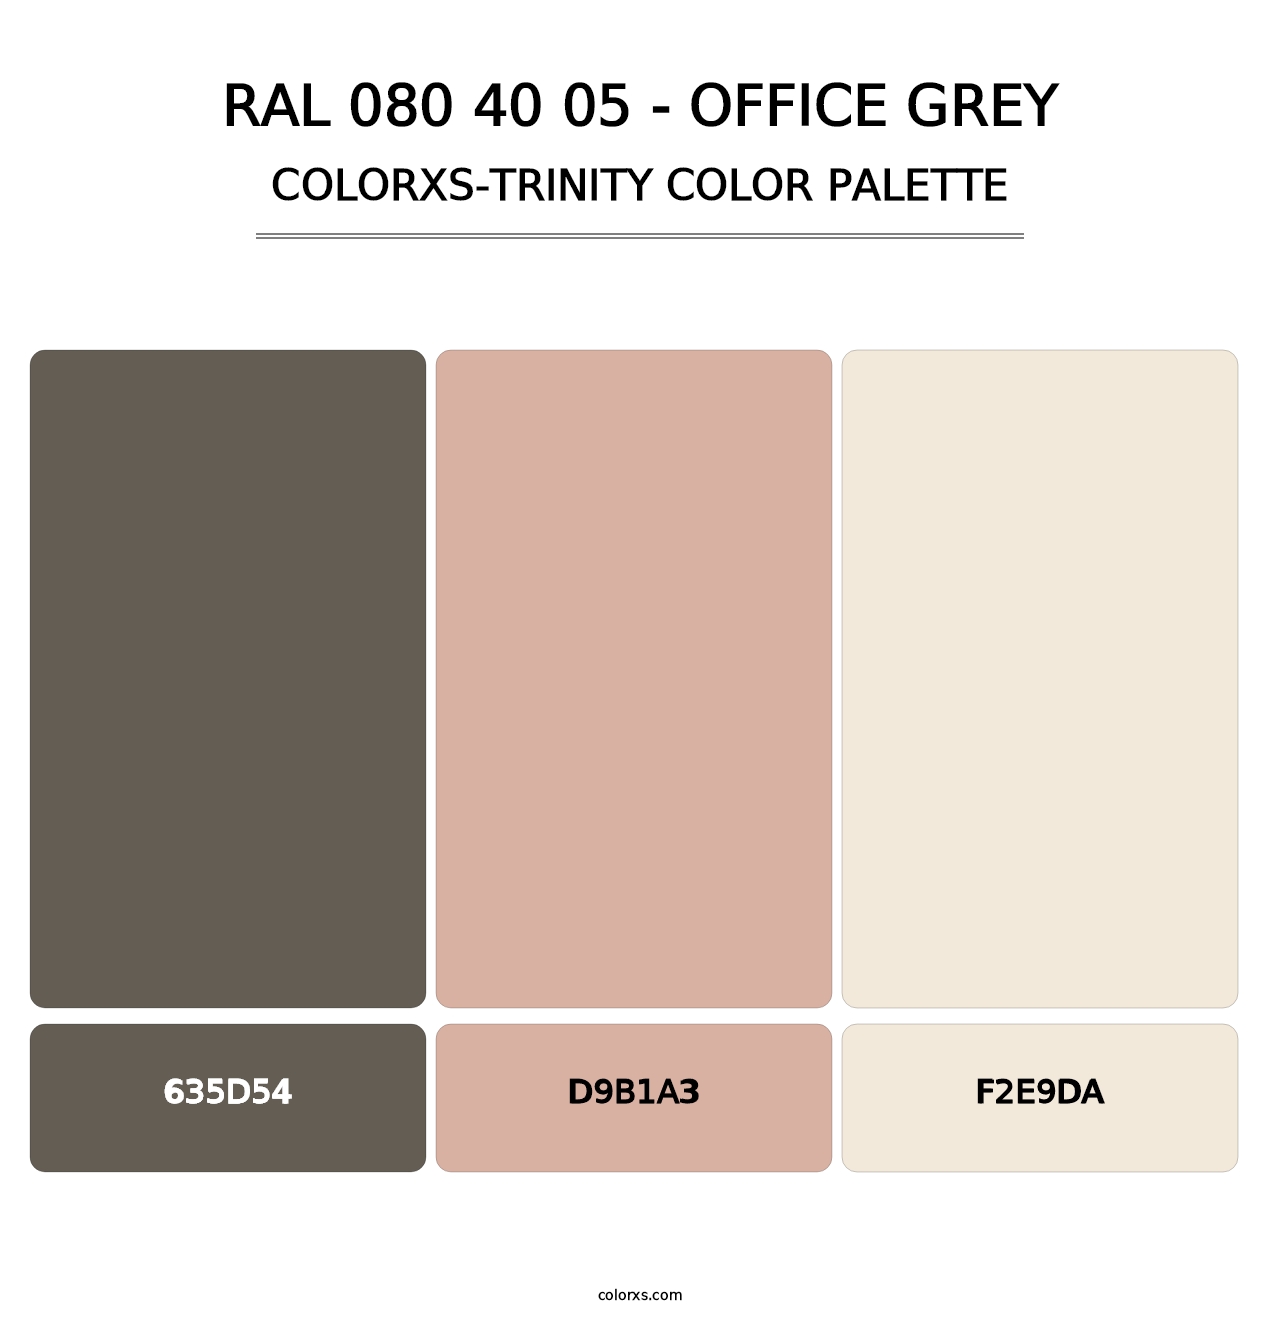 RAL 080 40 05 - Office Grey - Colorxs Trinity Palette